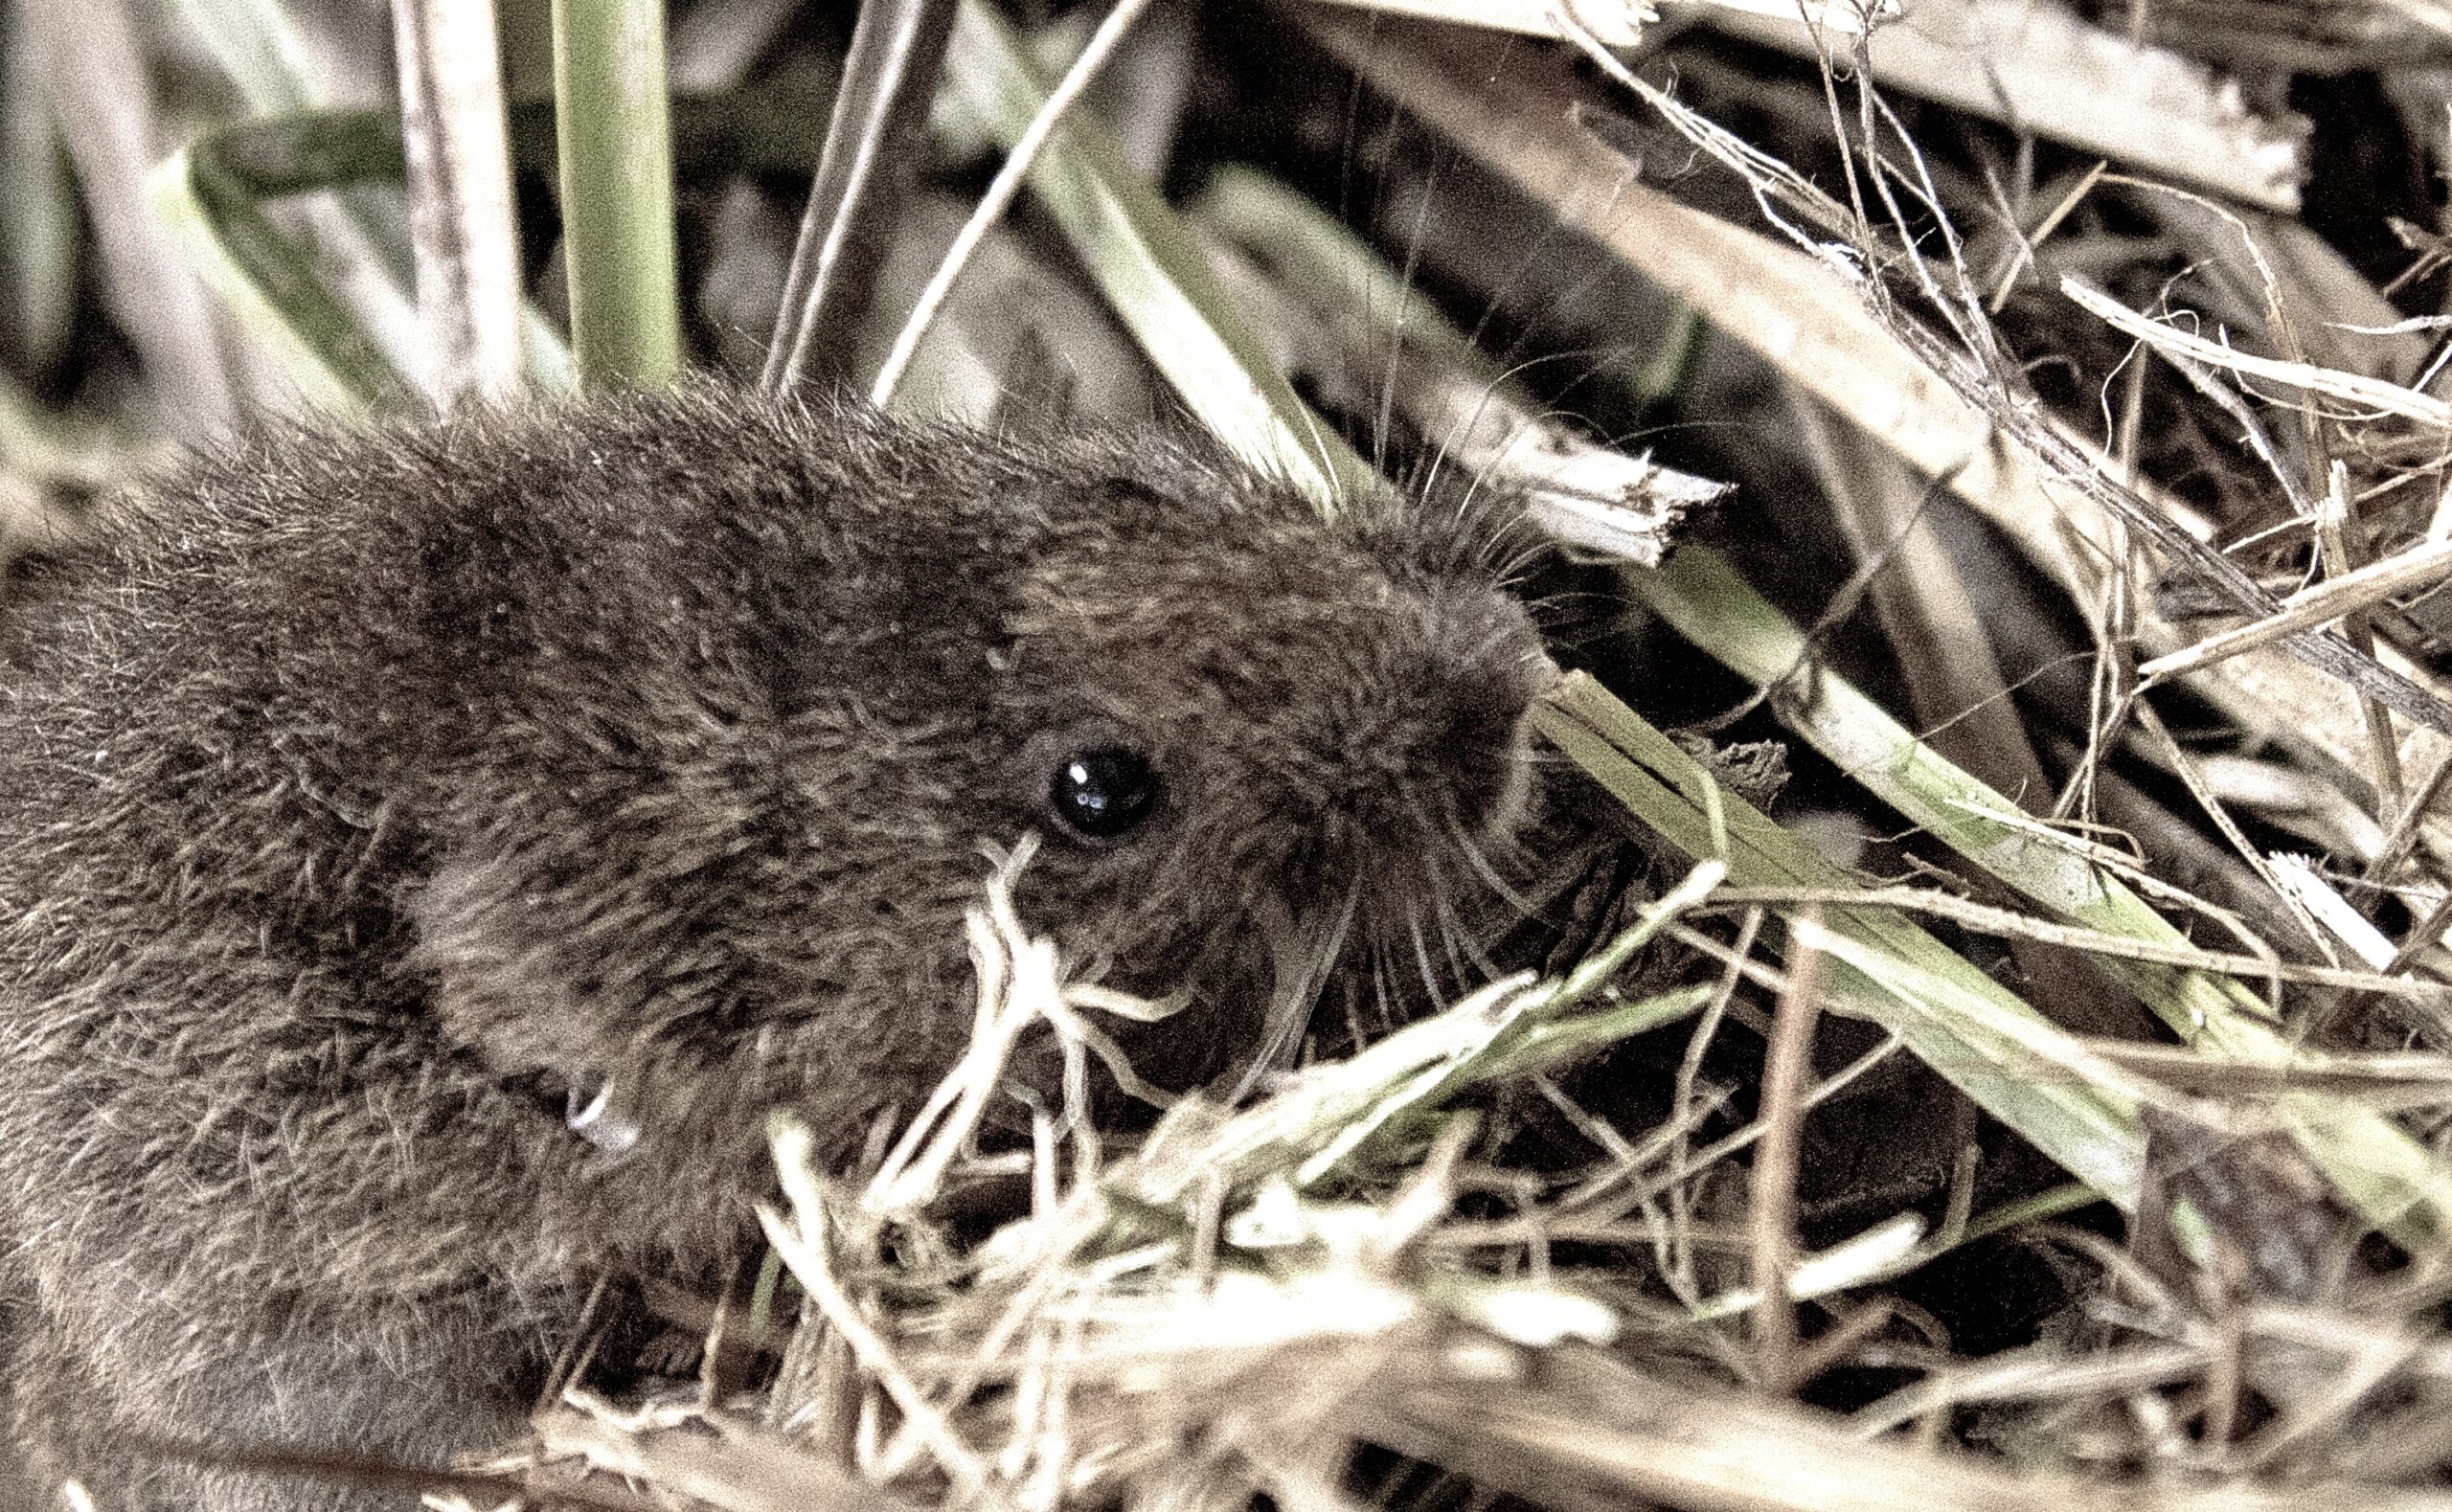 CDFW News Release: Endangered Voles Begin To Repopulate In Inyo County, With Help From Scientists, Conservationists And Landowner